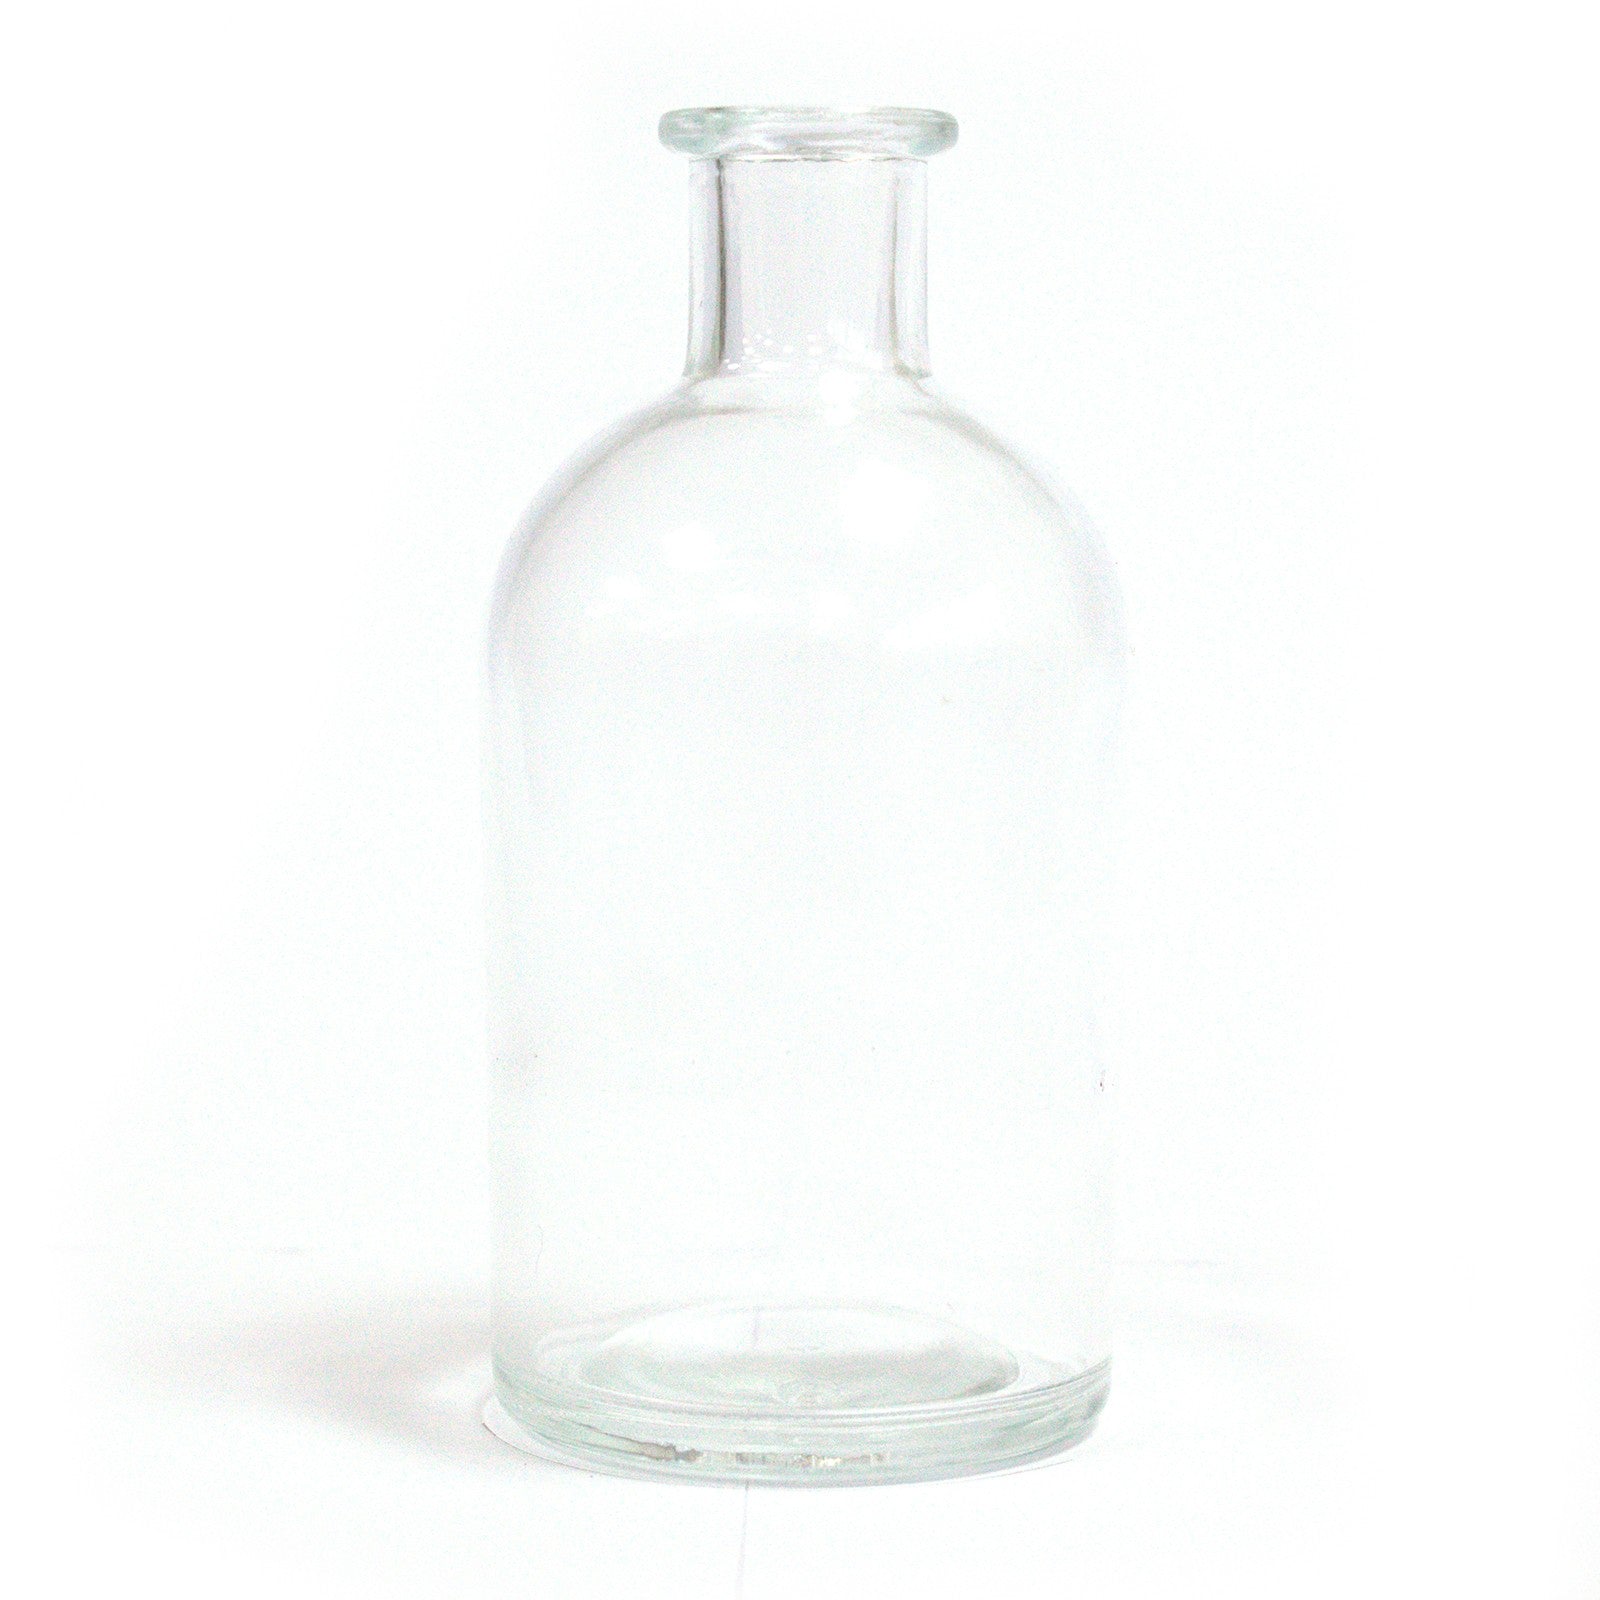 View 250 ml Round Antique Reed Diffuser Bottle Clear information